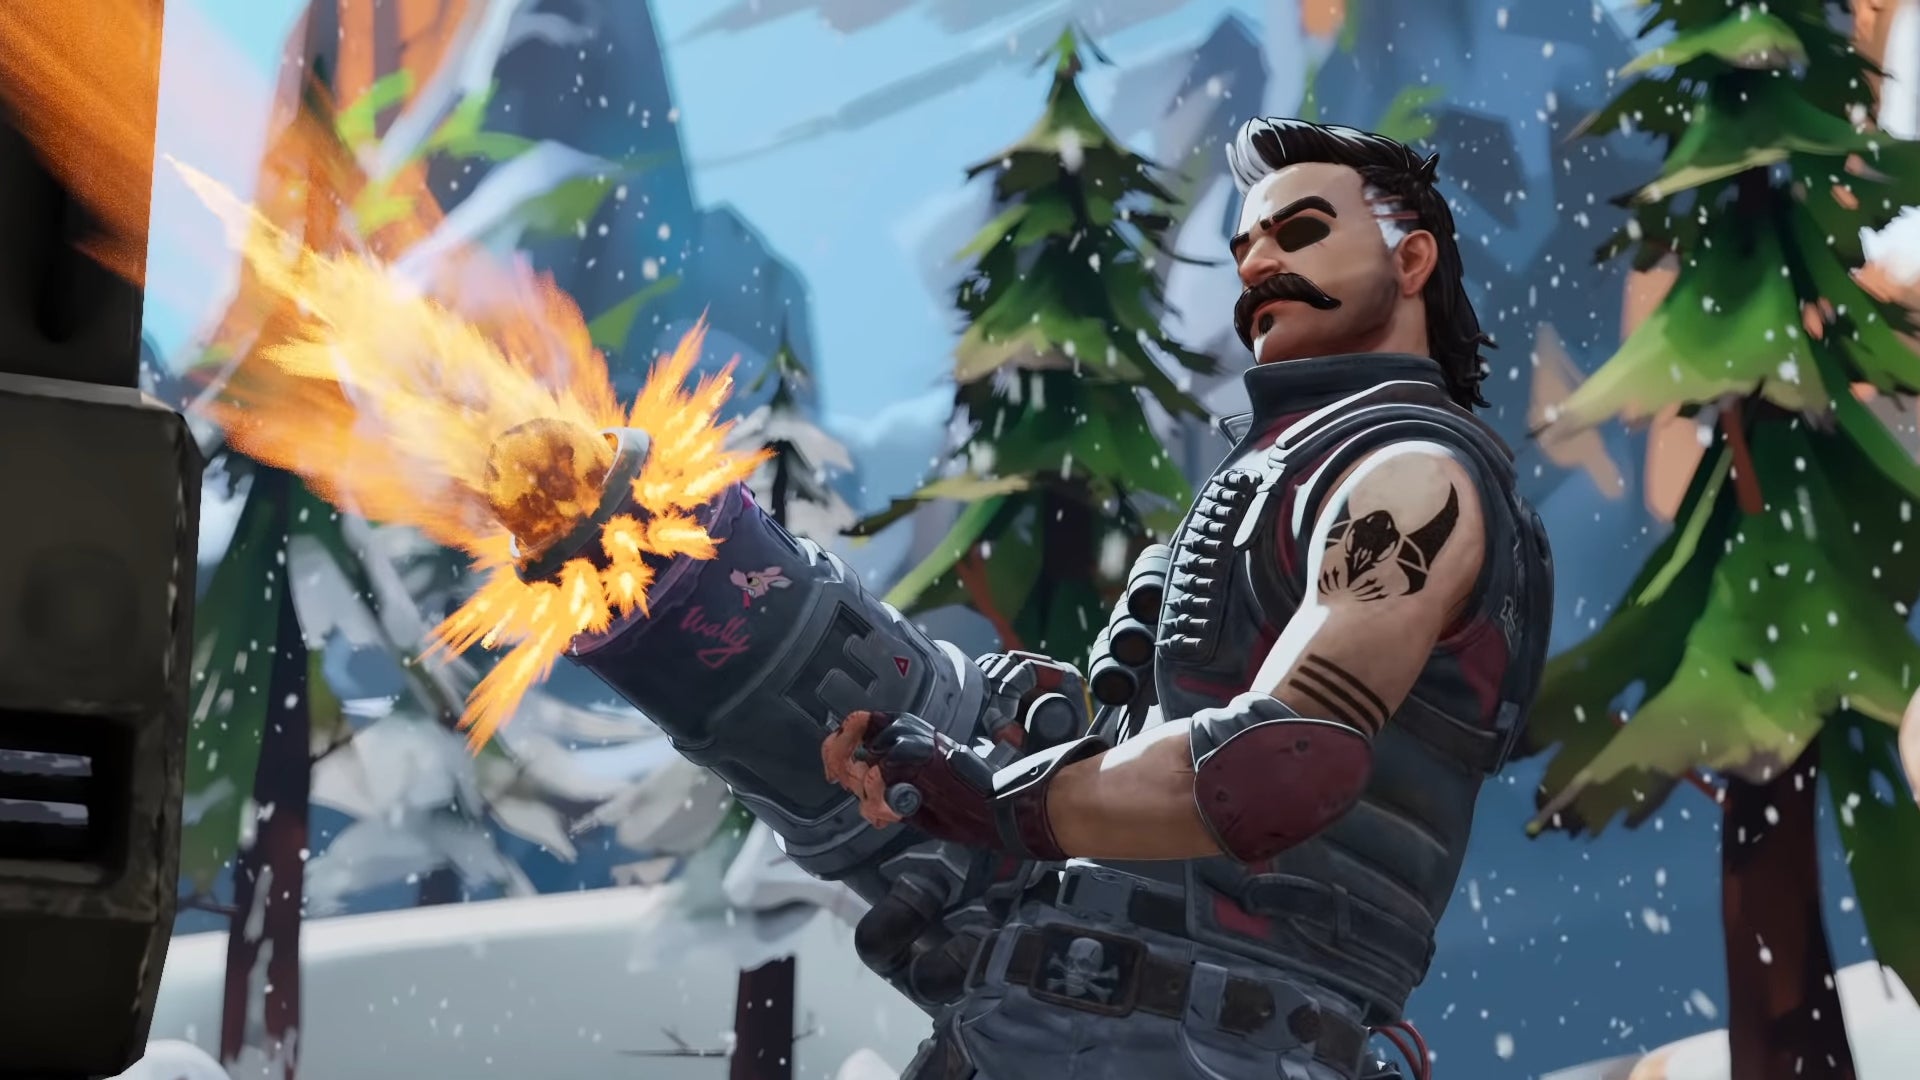 Fuse fires his Motherlode Ultimate into the air in Apex Legends.